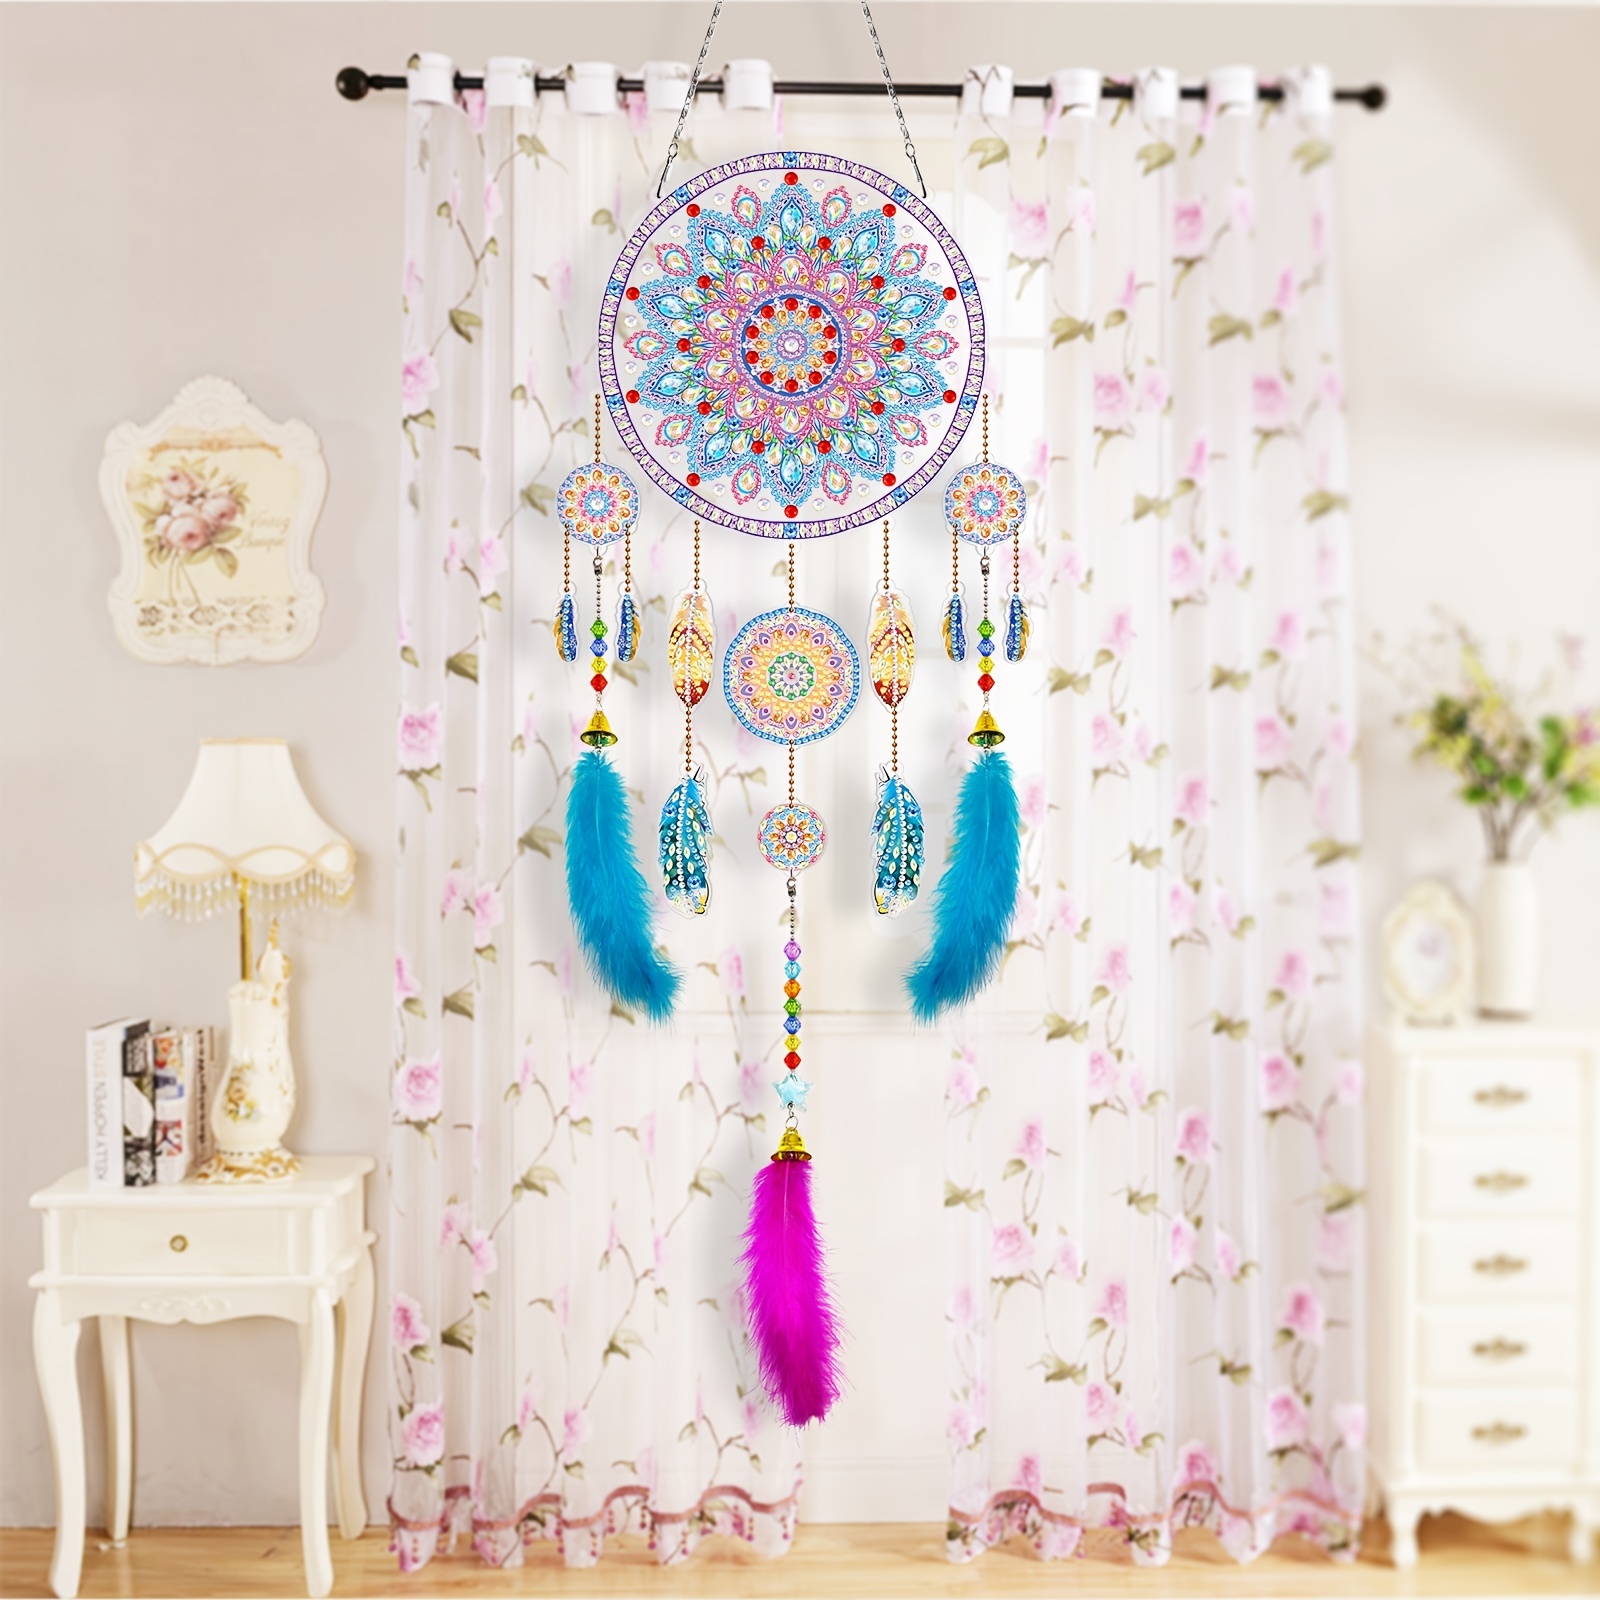 Diy 5d Diamond Painting, Dream Catcher, Wonderl, Rhinestone Crafts For  Beginners, Diamond Painting Kit For Adults, Diamond Art Kit, Gemstone Art  Painting, Decoration Pictures, Promote Family Harmony, Grow With, Cultivate  Mood, Lose